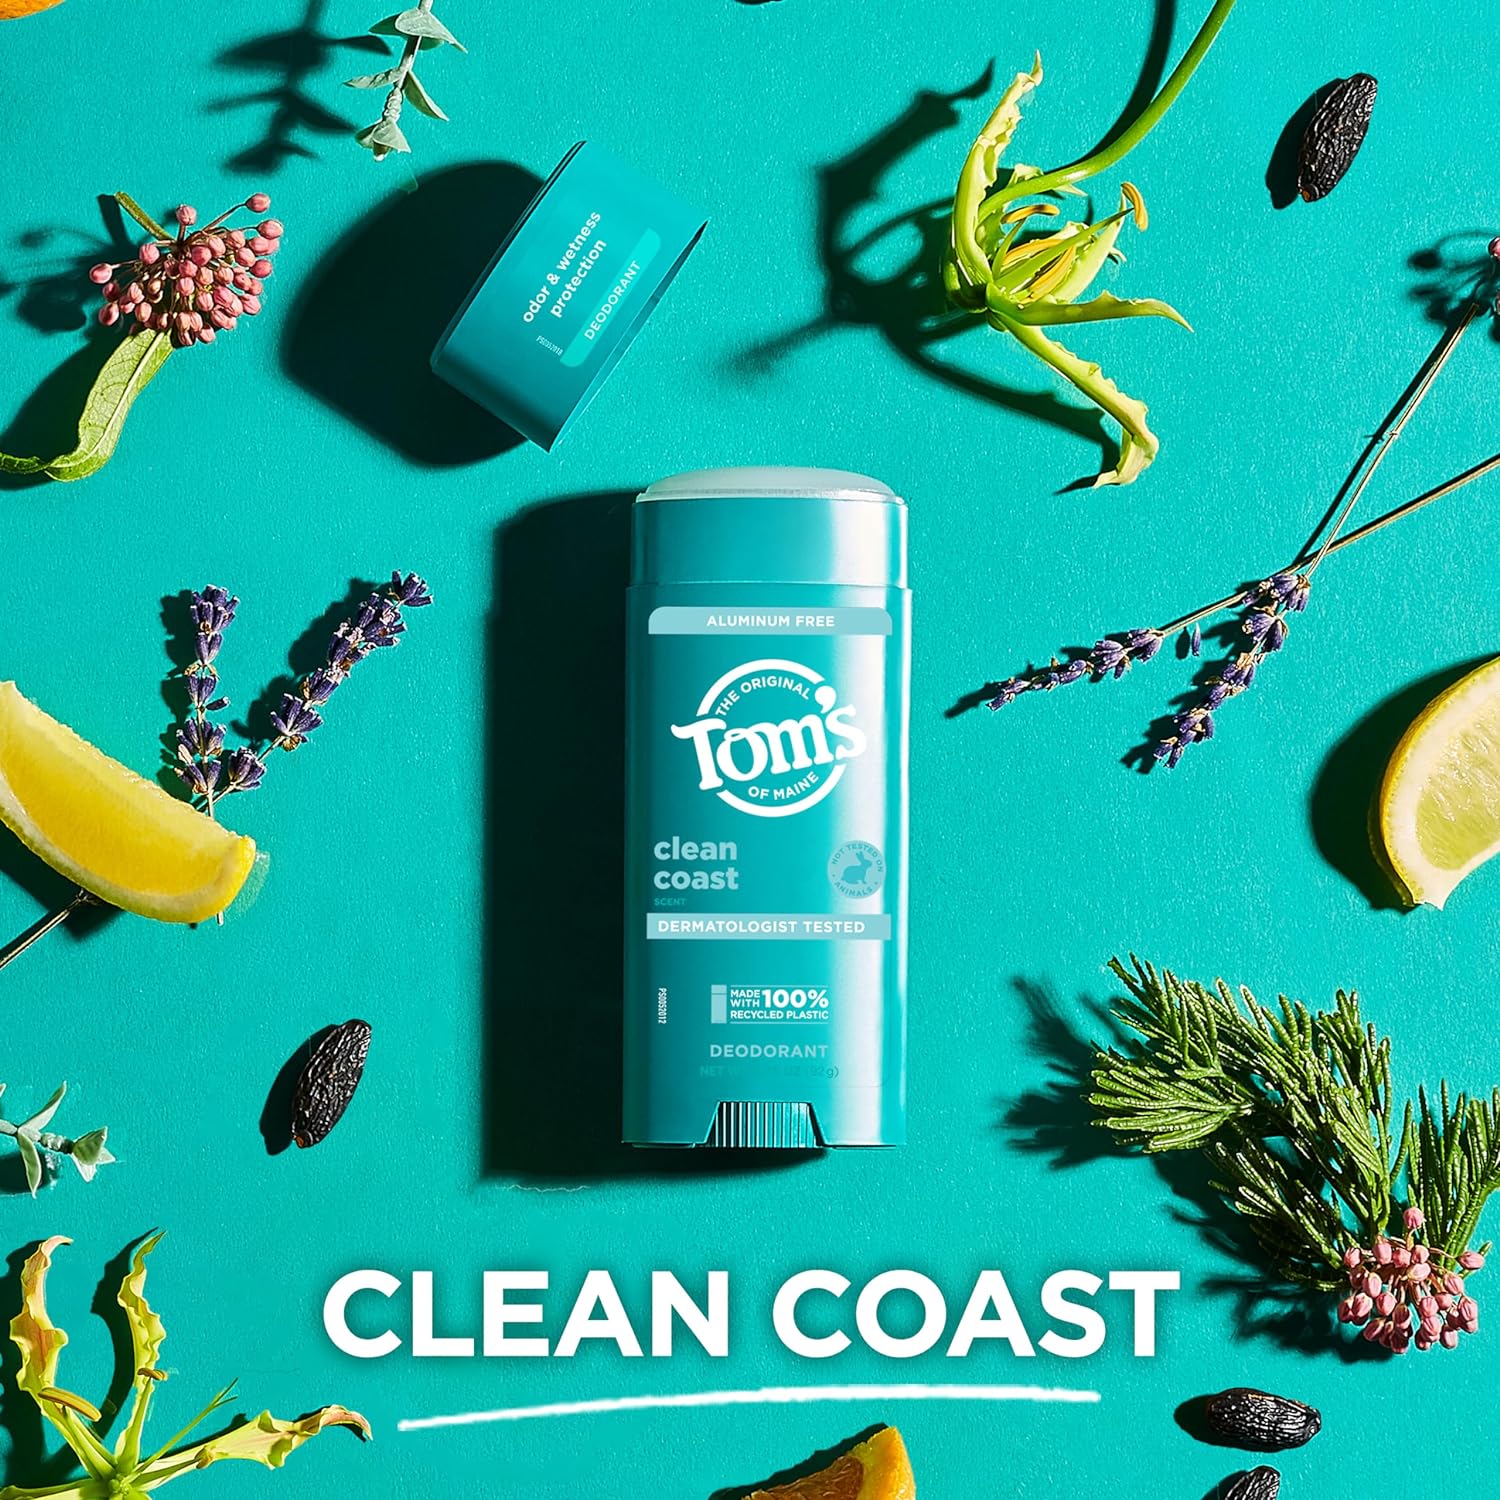 Tom’s of Maine Clean Coast Natural Deodorant for Men and Women, Aluminum Free, 3.25 oz : Everything Else